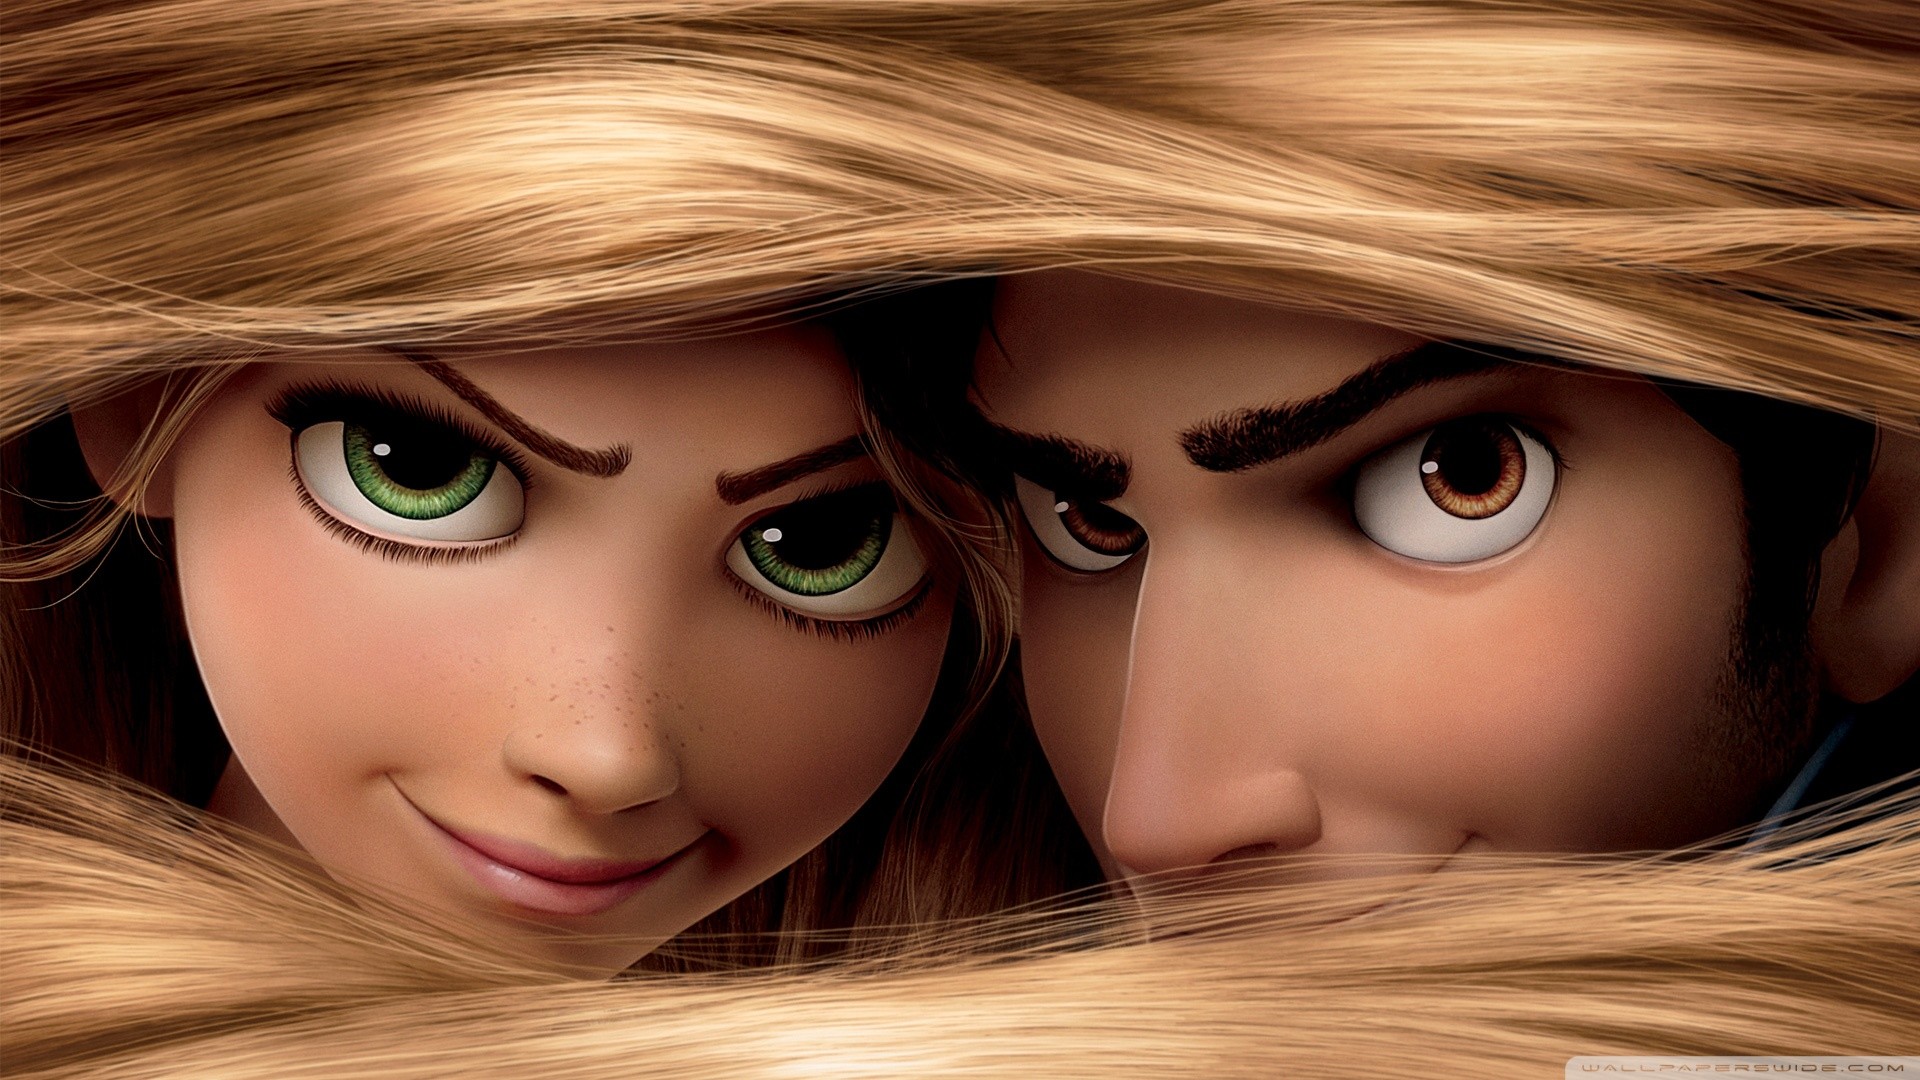 1920x1080 Disney's Movie Tangled HD Wide Wallpaper for Widescreen